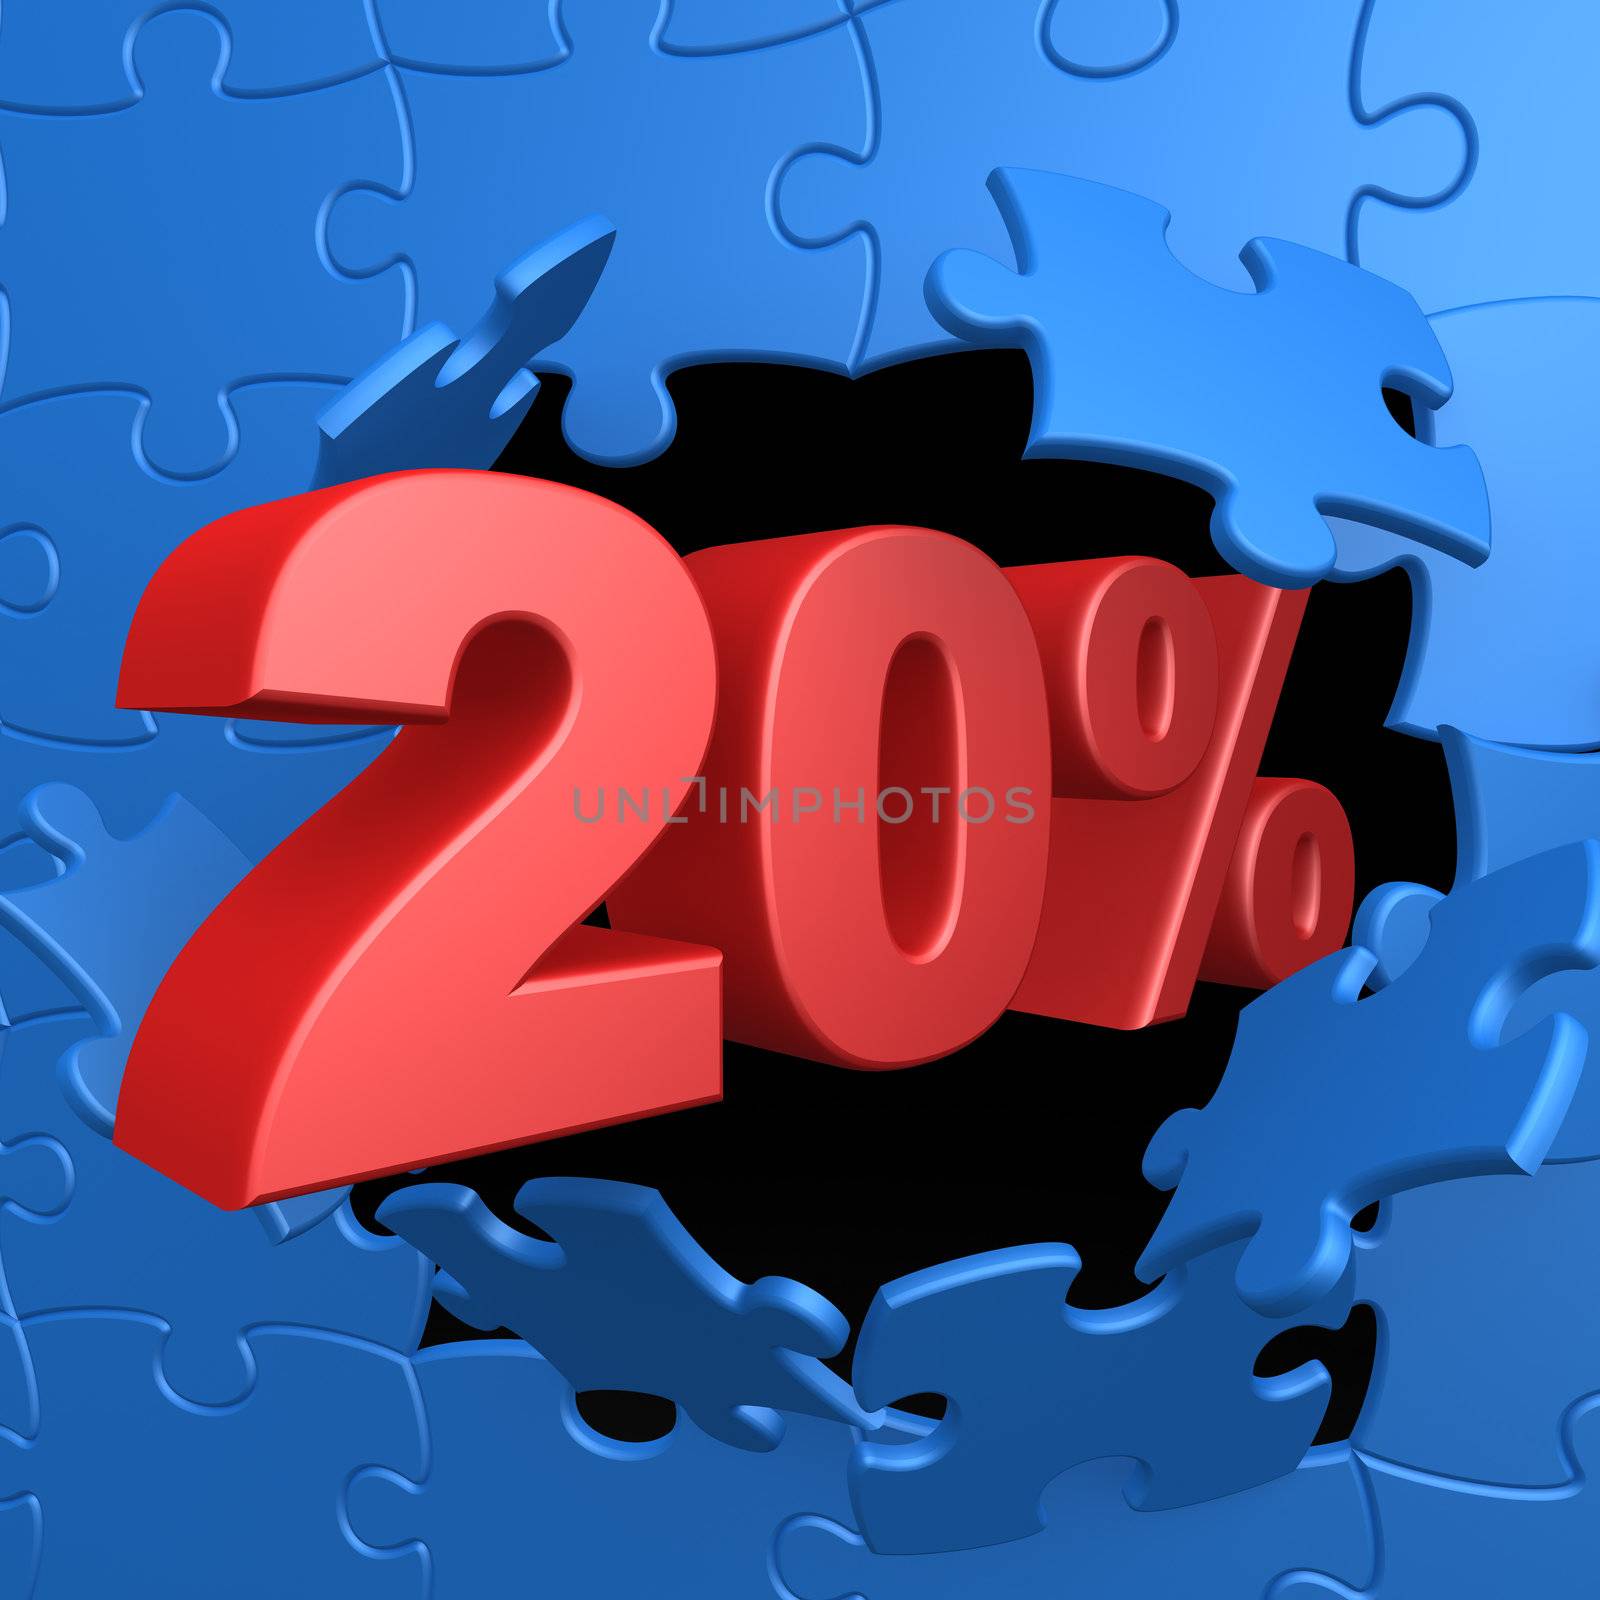 20% Off by 3pod